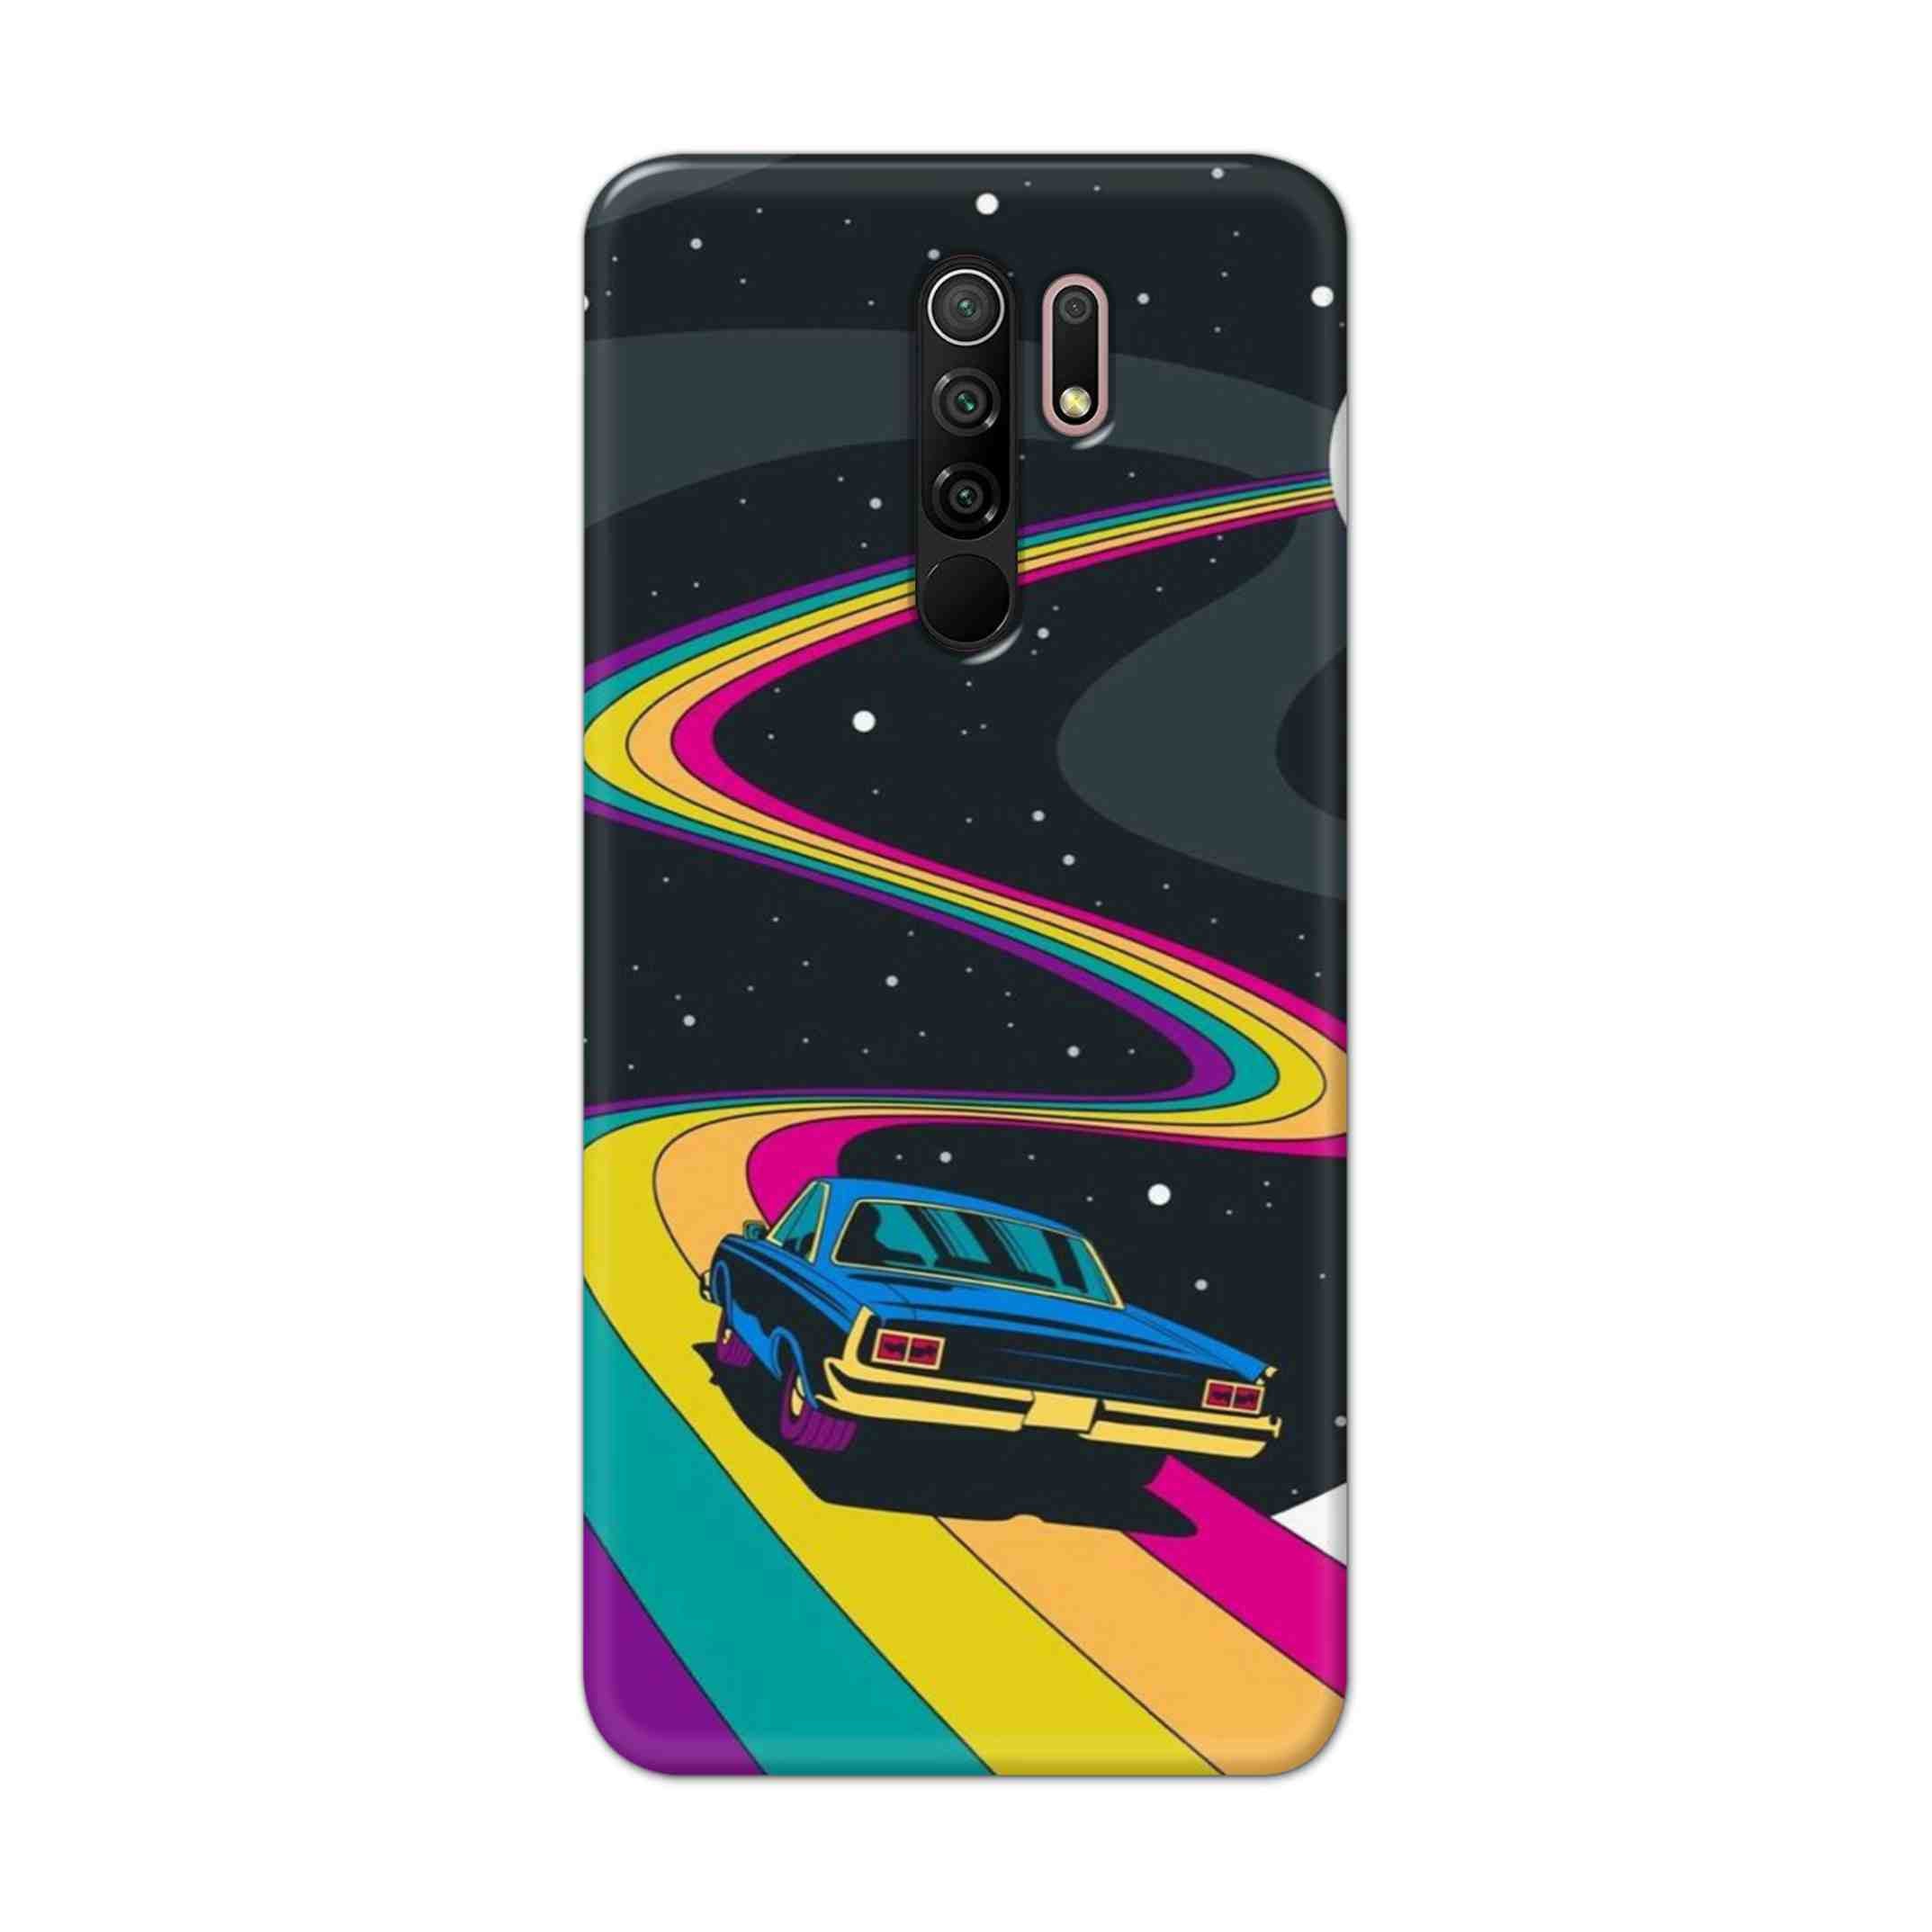 Buy  Neon Car Hard Back Mobile Phone Case Cover For Xiaomi Redmi 9 Prime Online